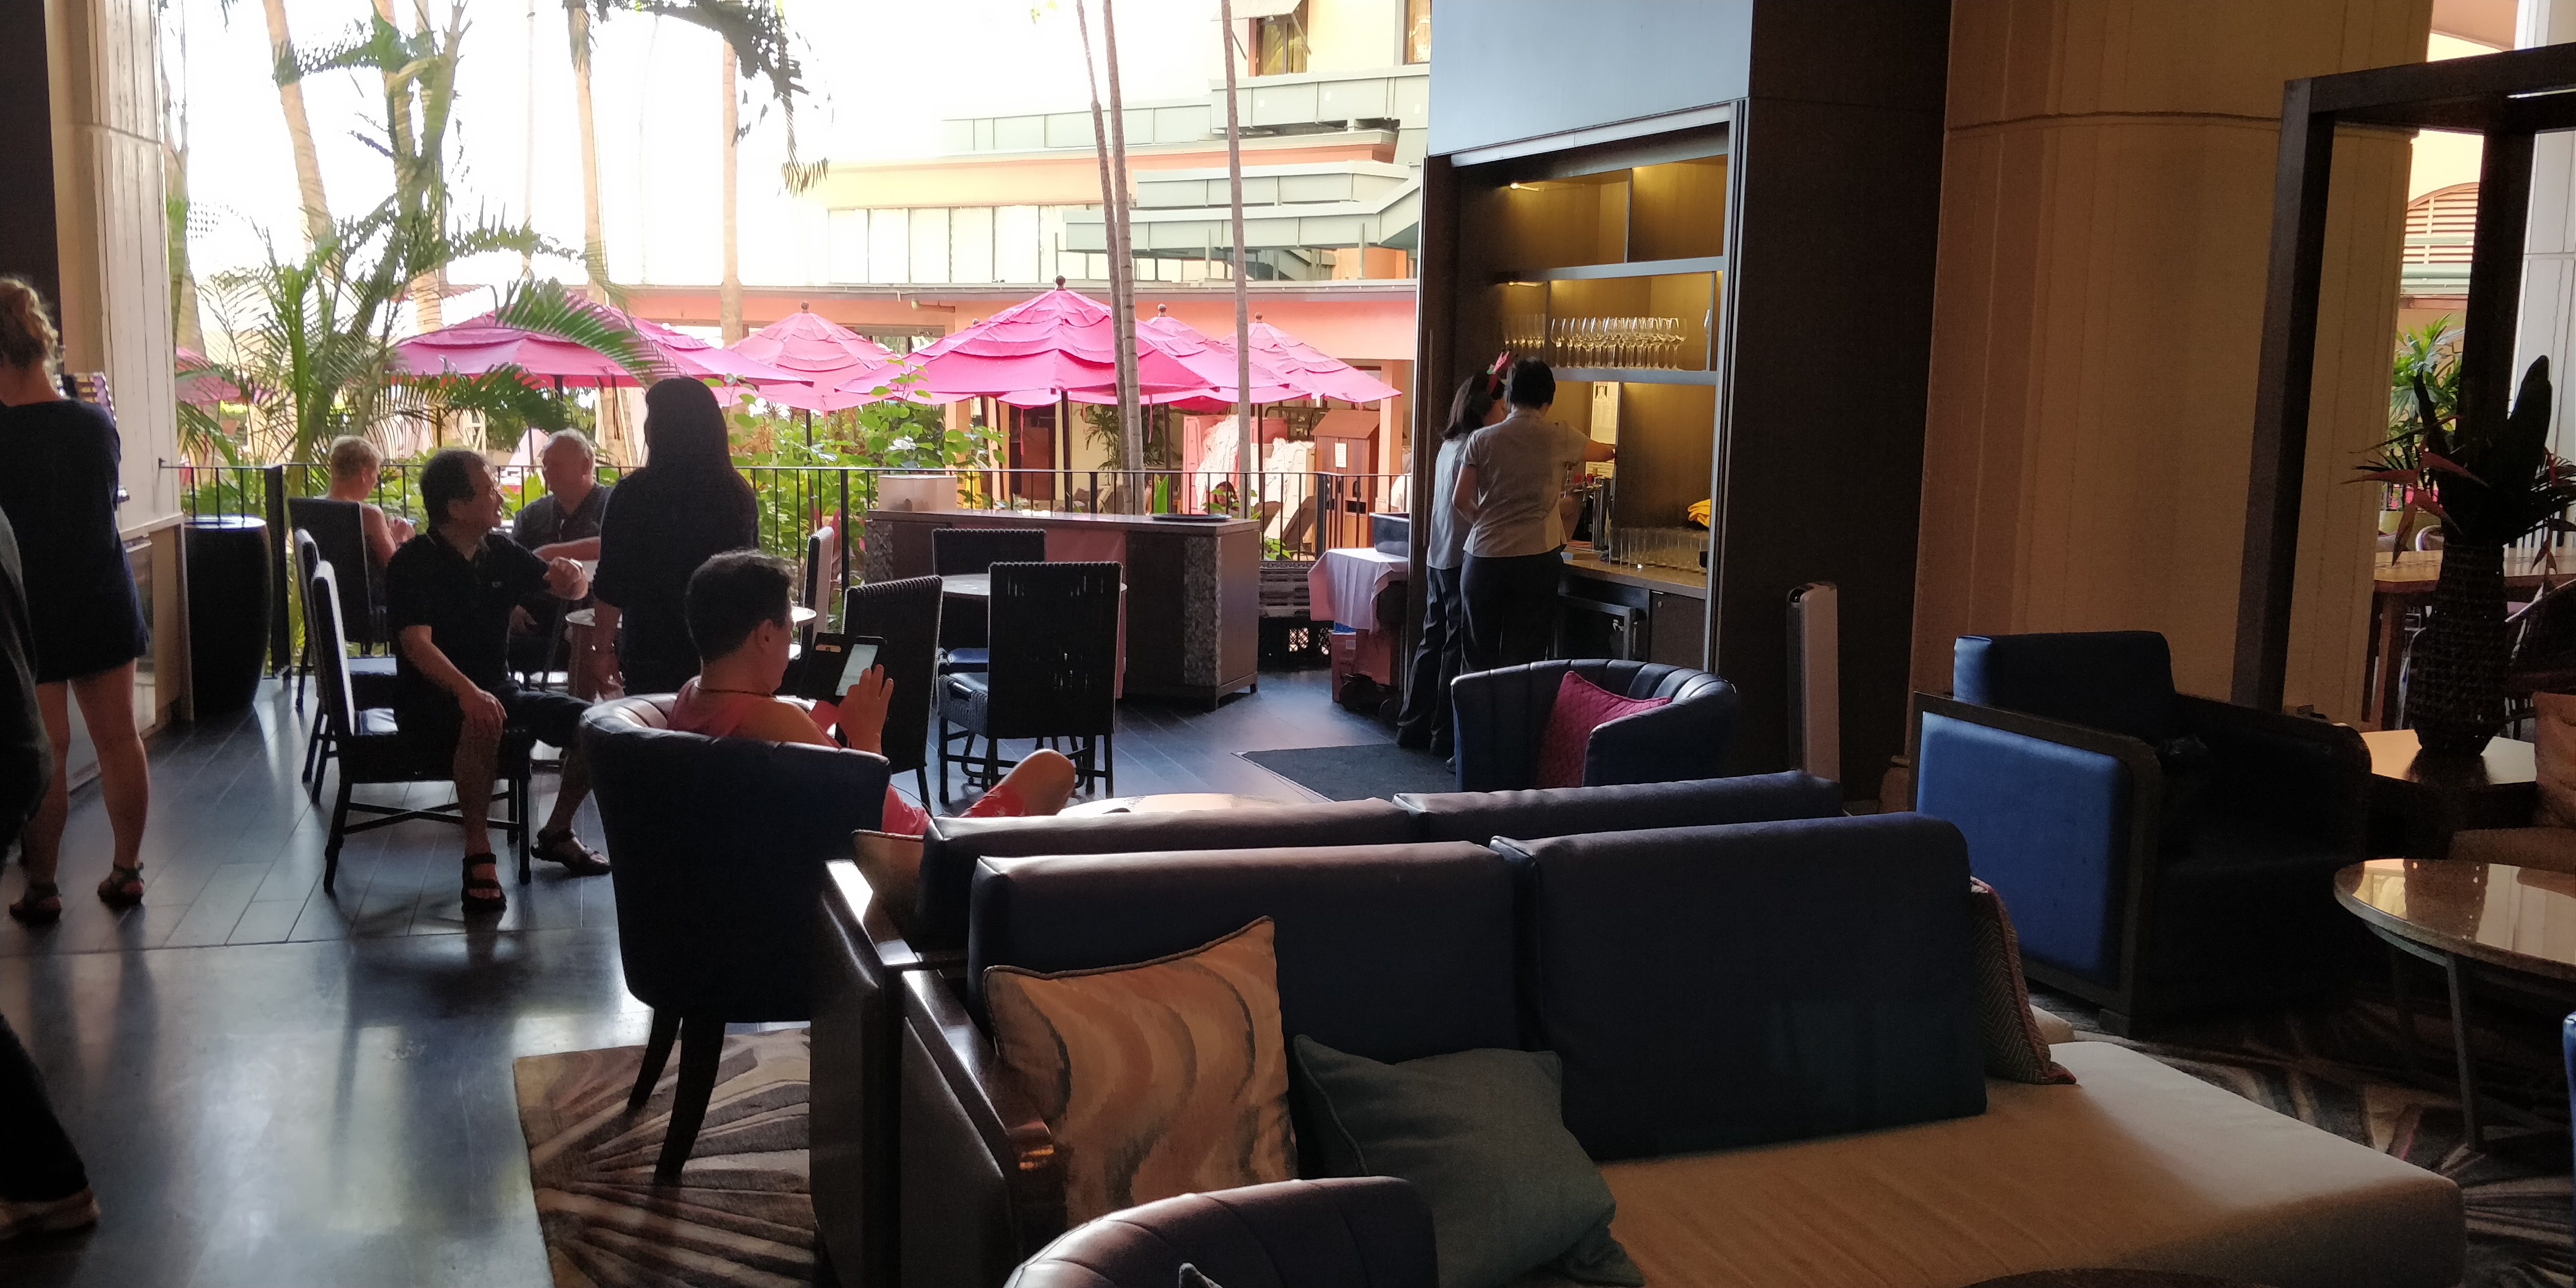 PICTURE OF THE SEATING IN THE MAI LANAI LOUNGE.